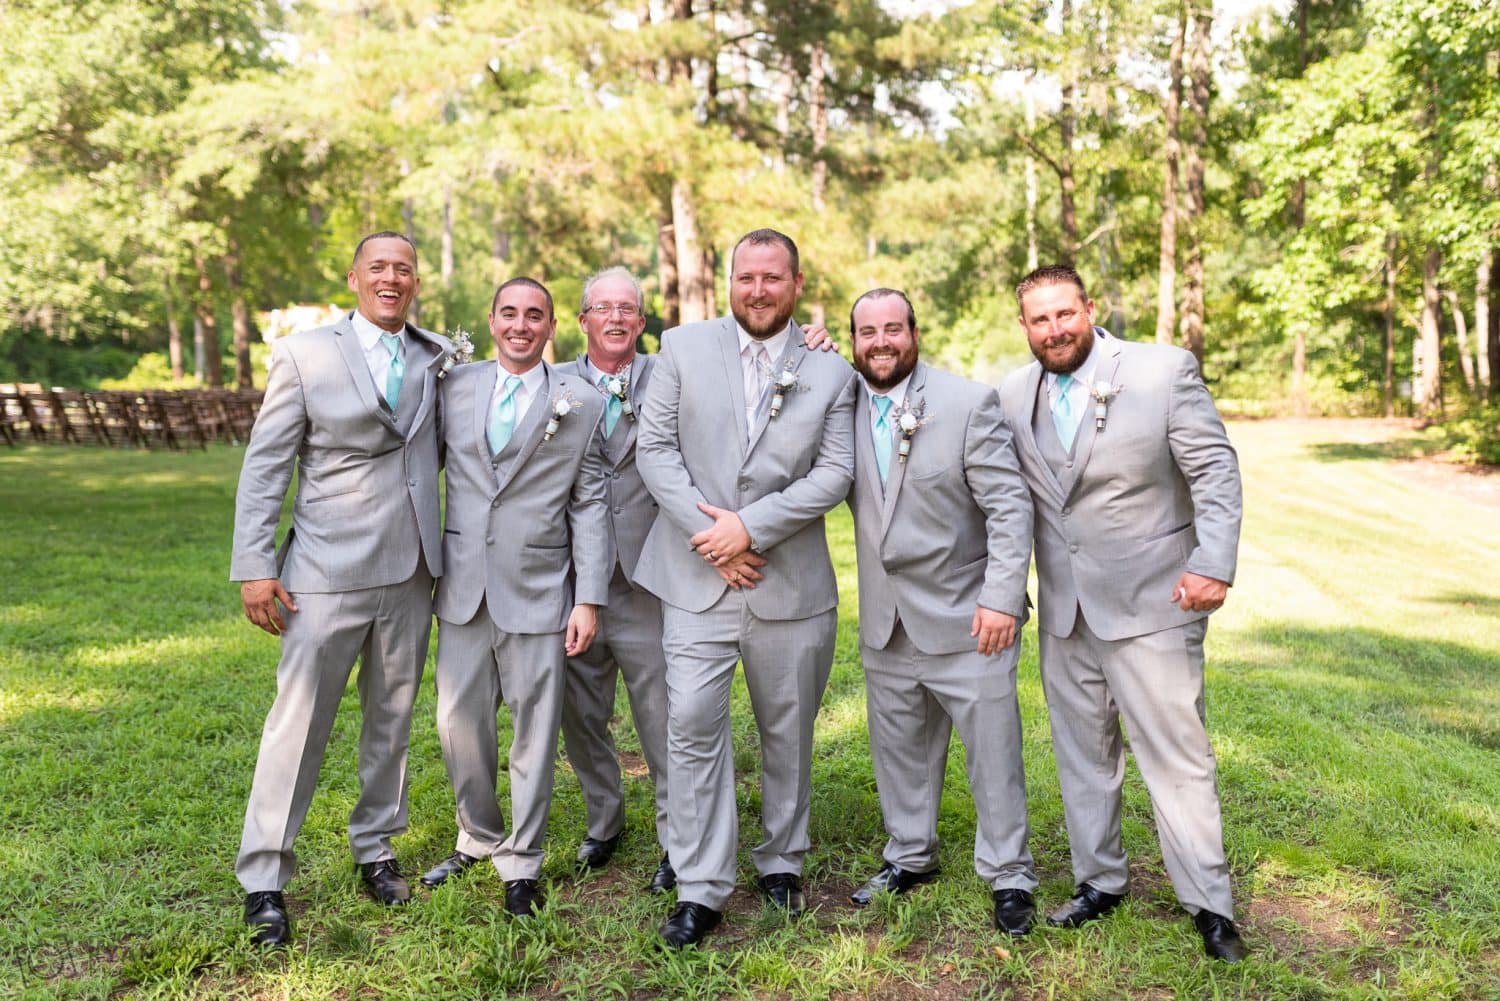 Pictures with the groomsmen Wildberry Farm